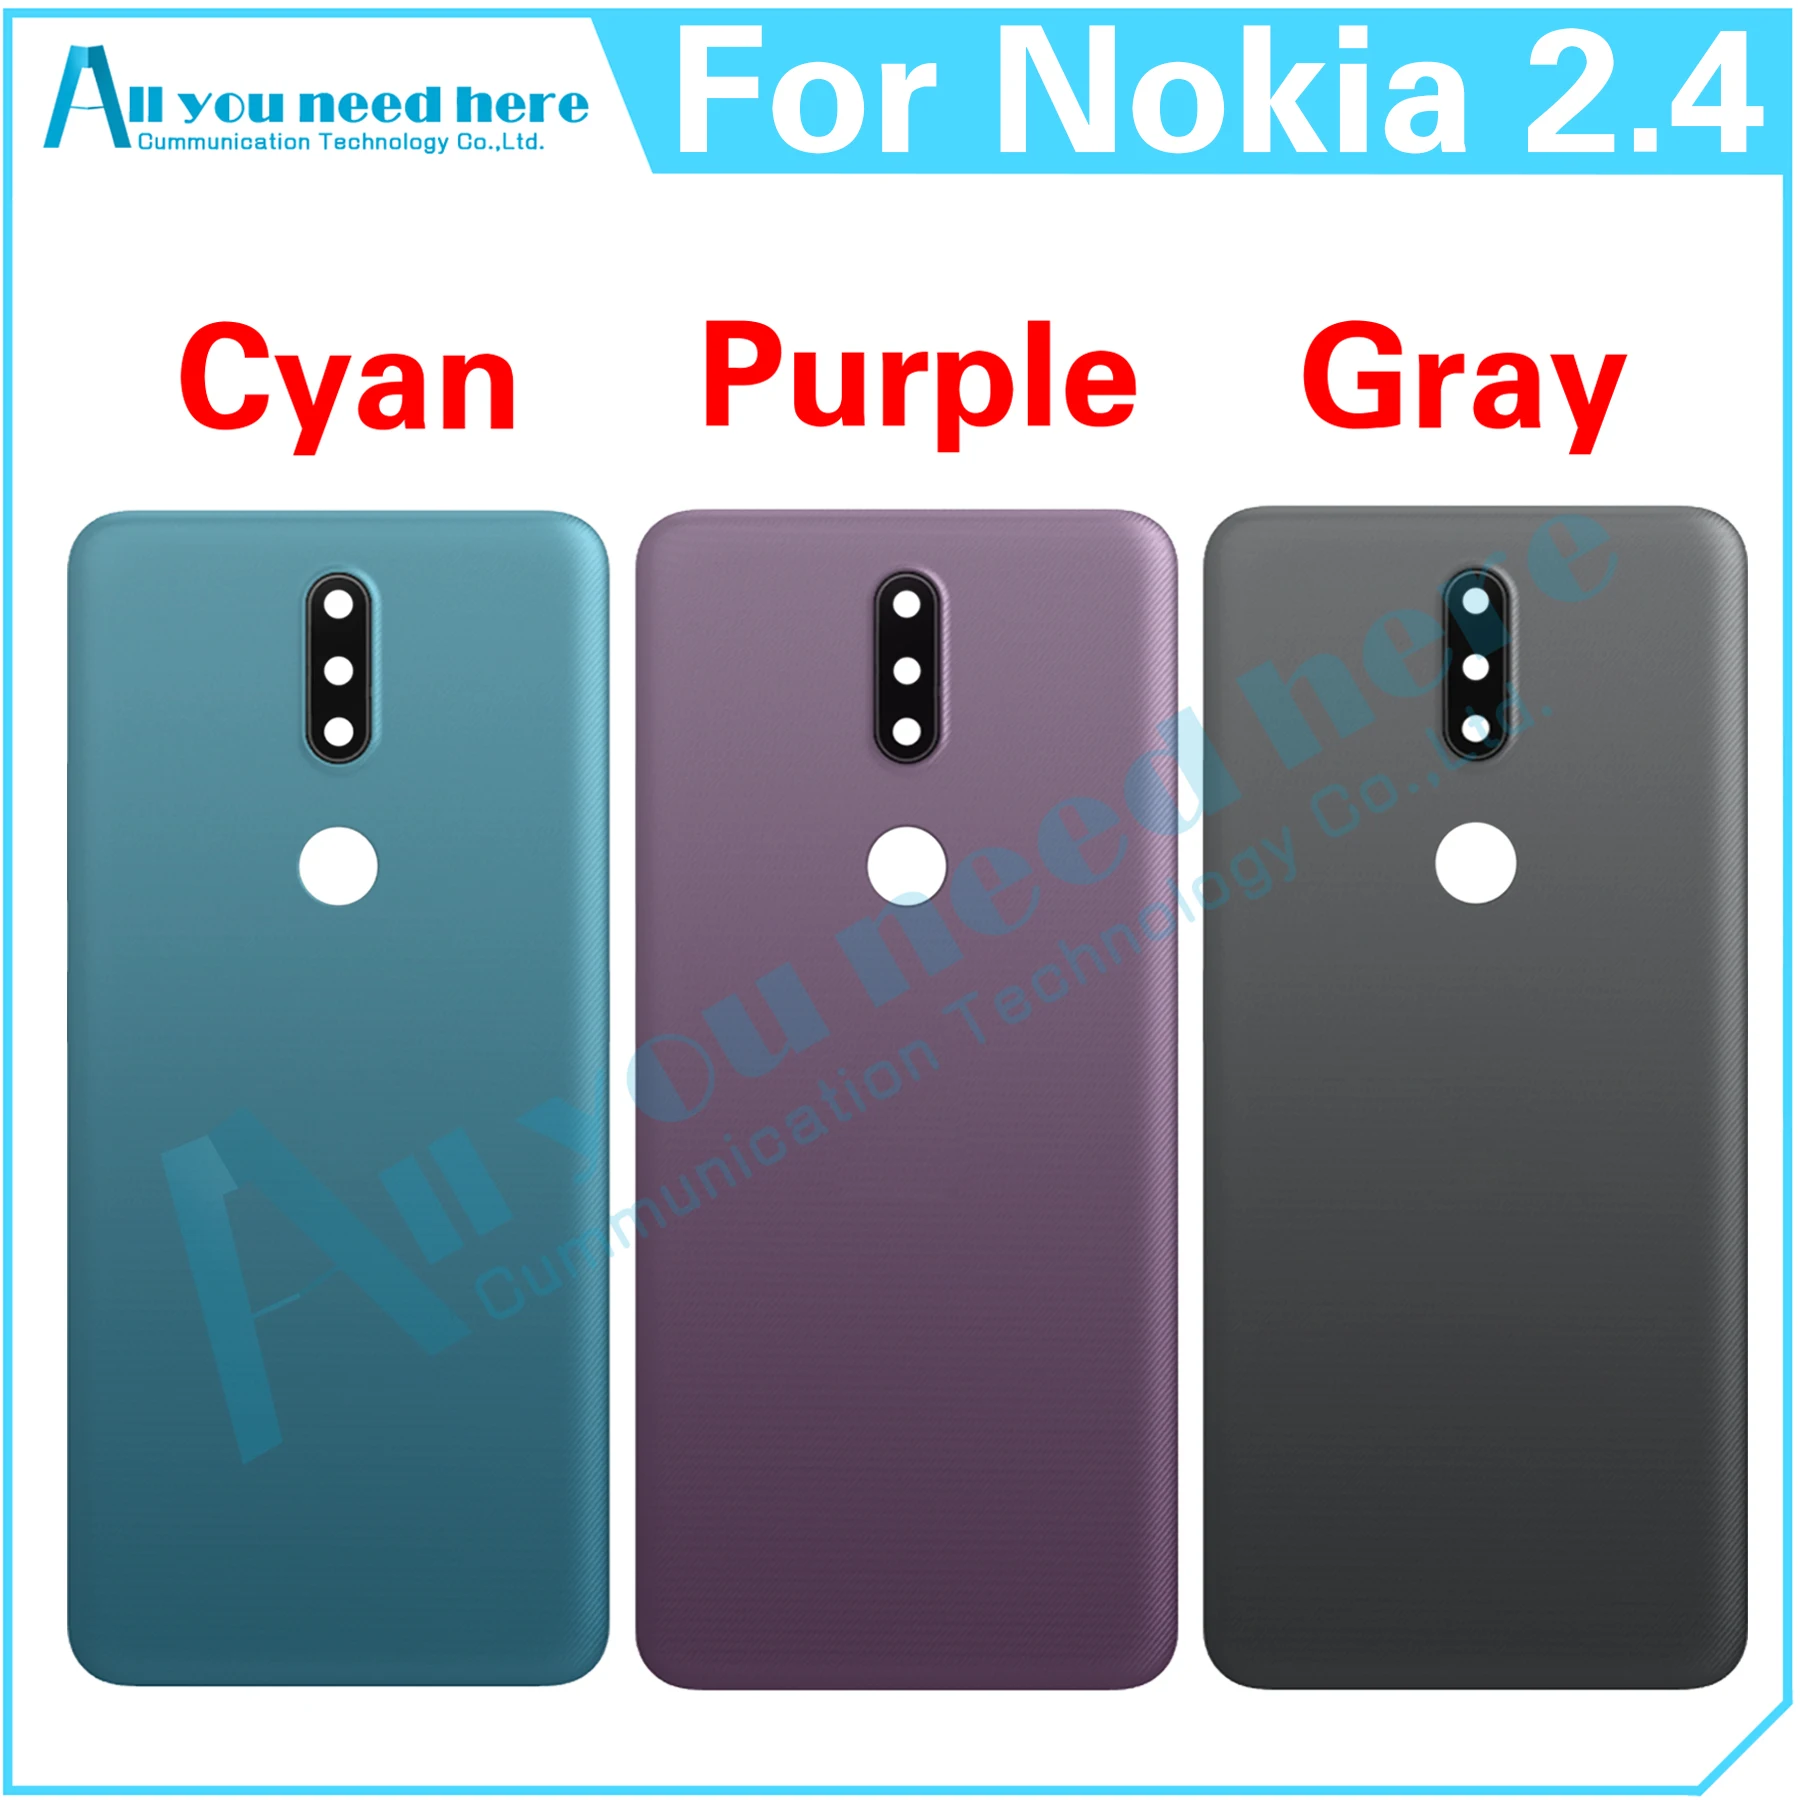 

For Nokia 2.4 TA-1277 TA-1275 TA-1274 TA-1270 Back Battery Cover Door Housing Case Rear Cover Replacement